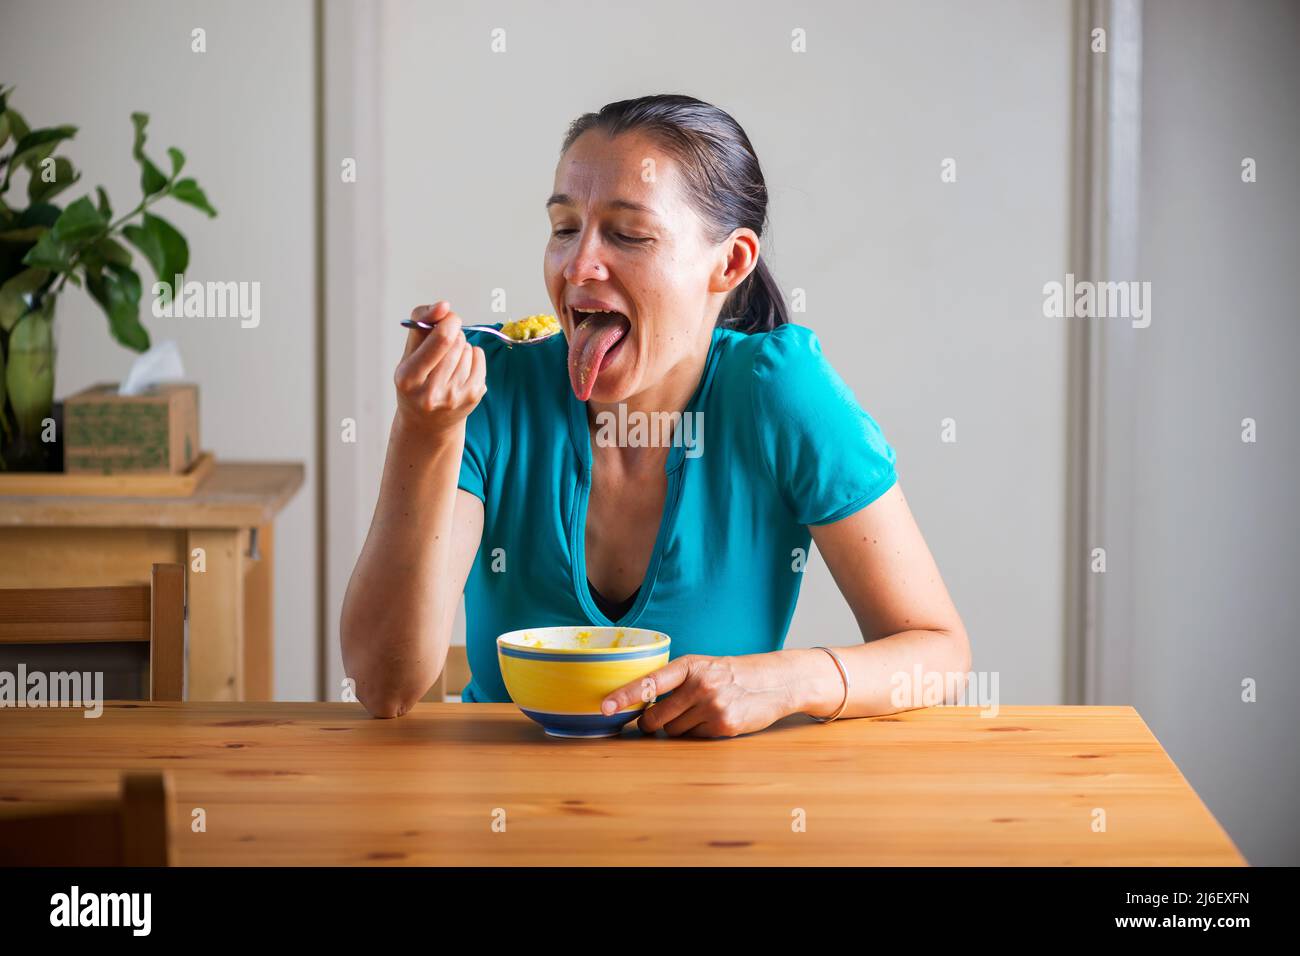 Woman eating kitchari for a breakfast and making funny faces.  Stock Photo